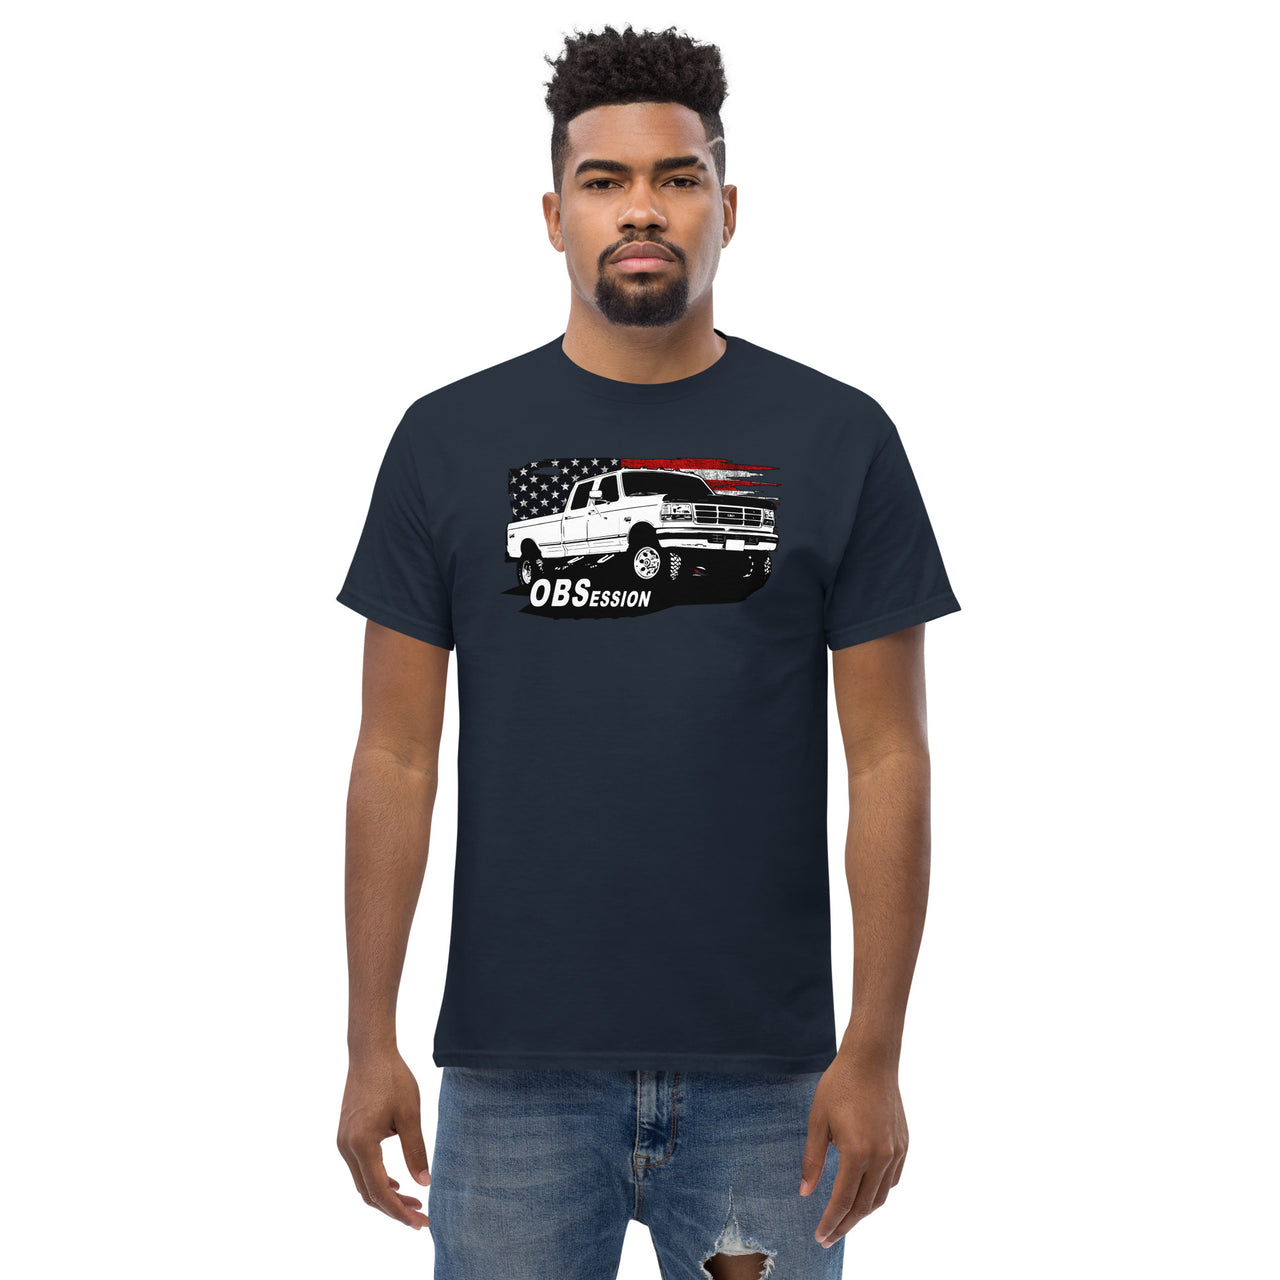 OBS Crew Cab Truck American Flag T-Shirt modeled in navy